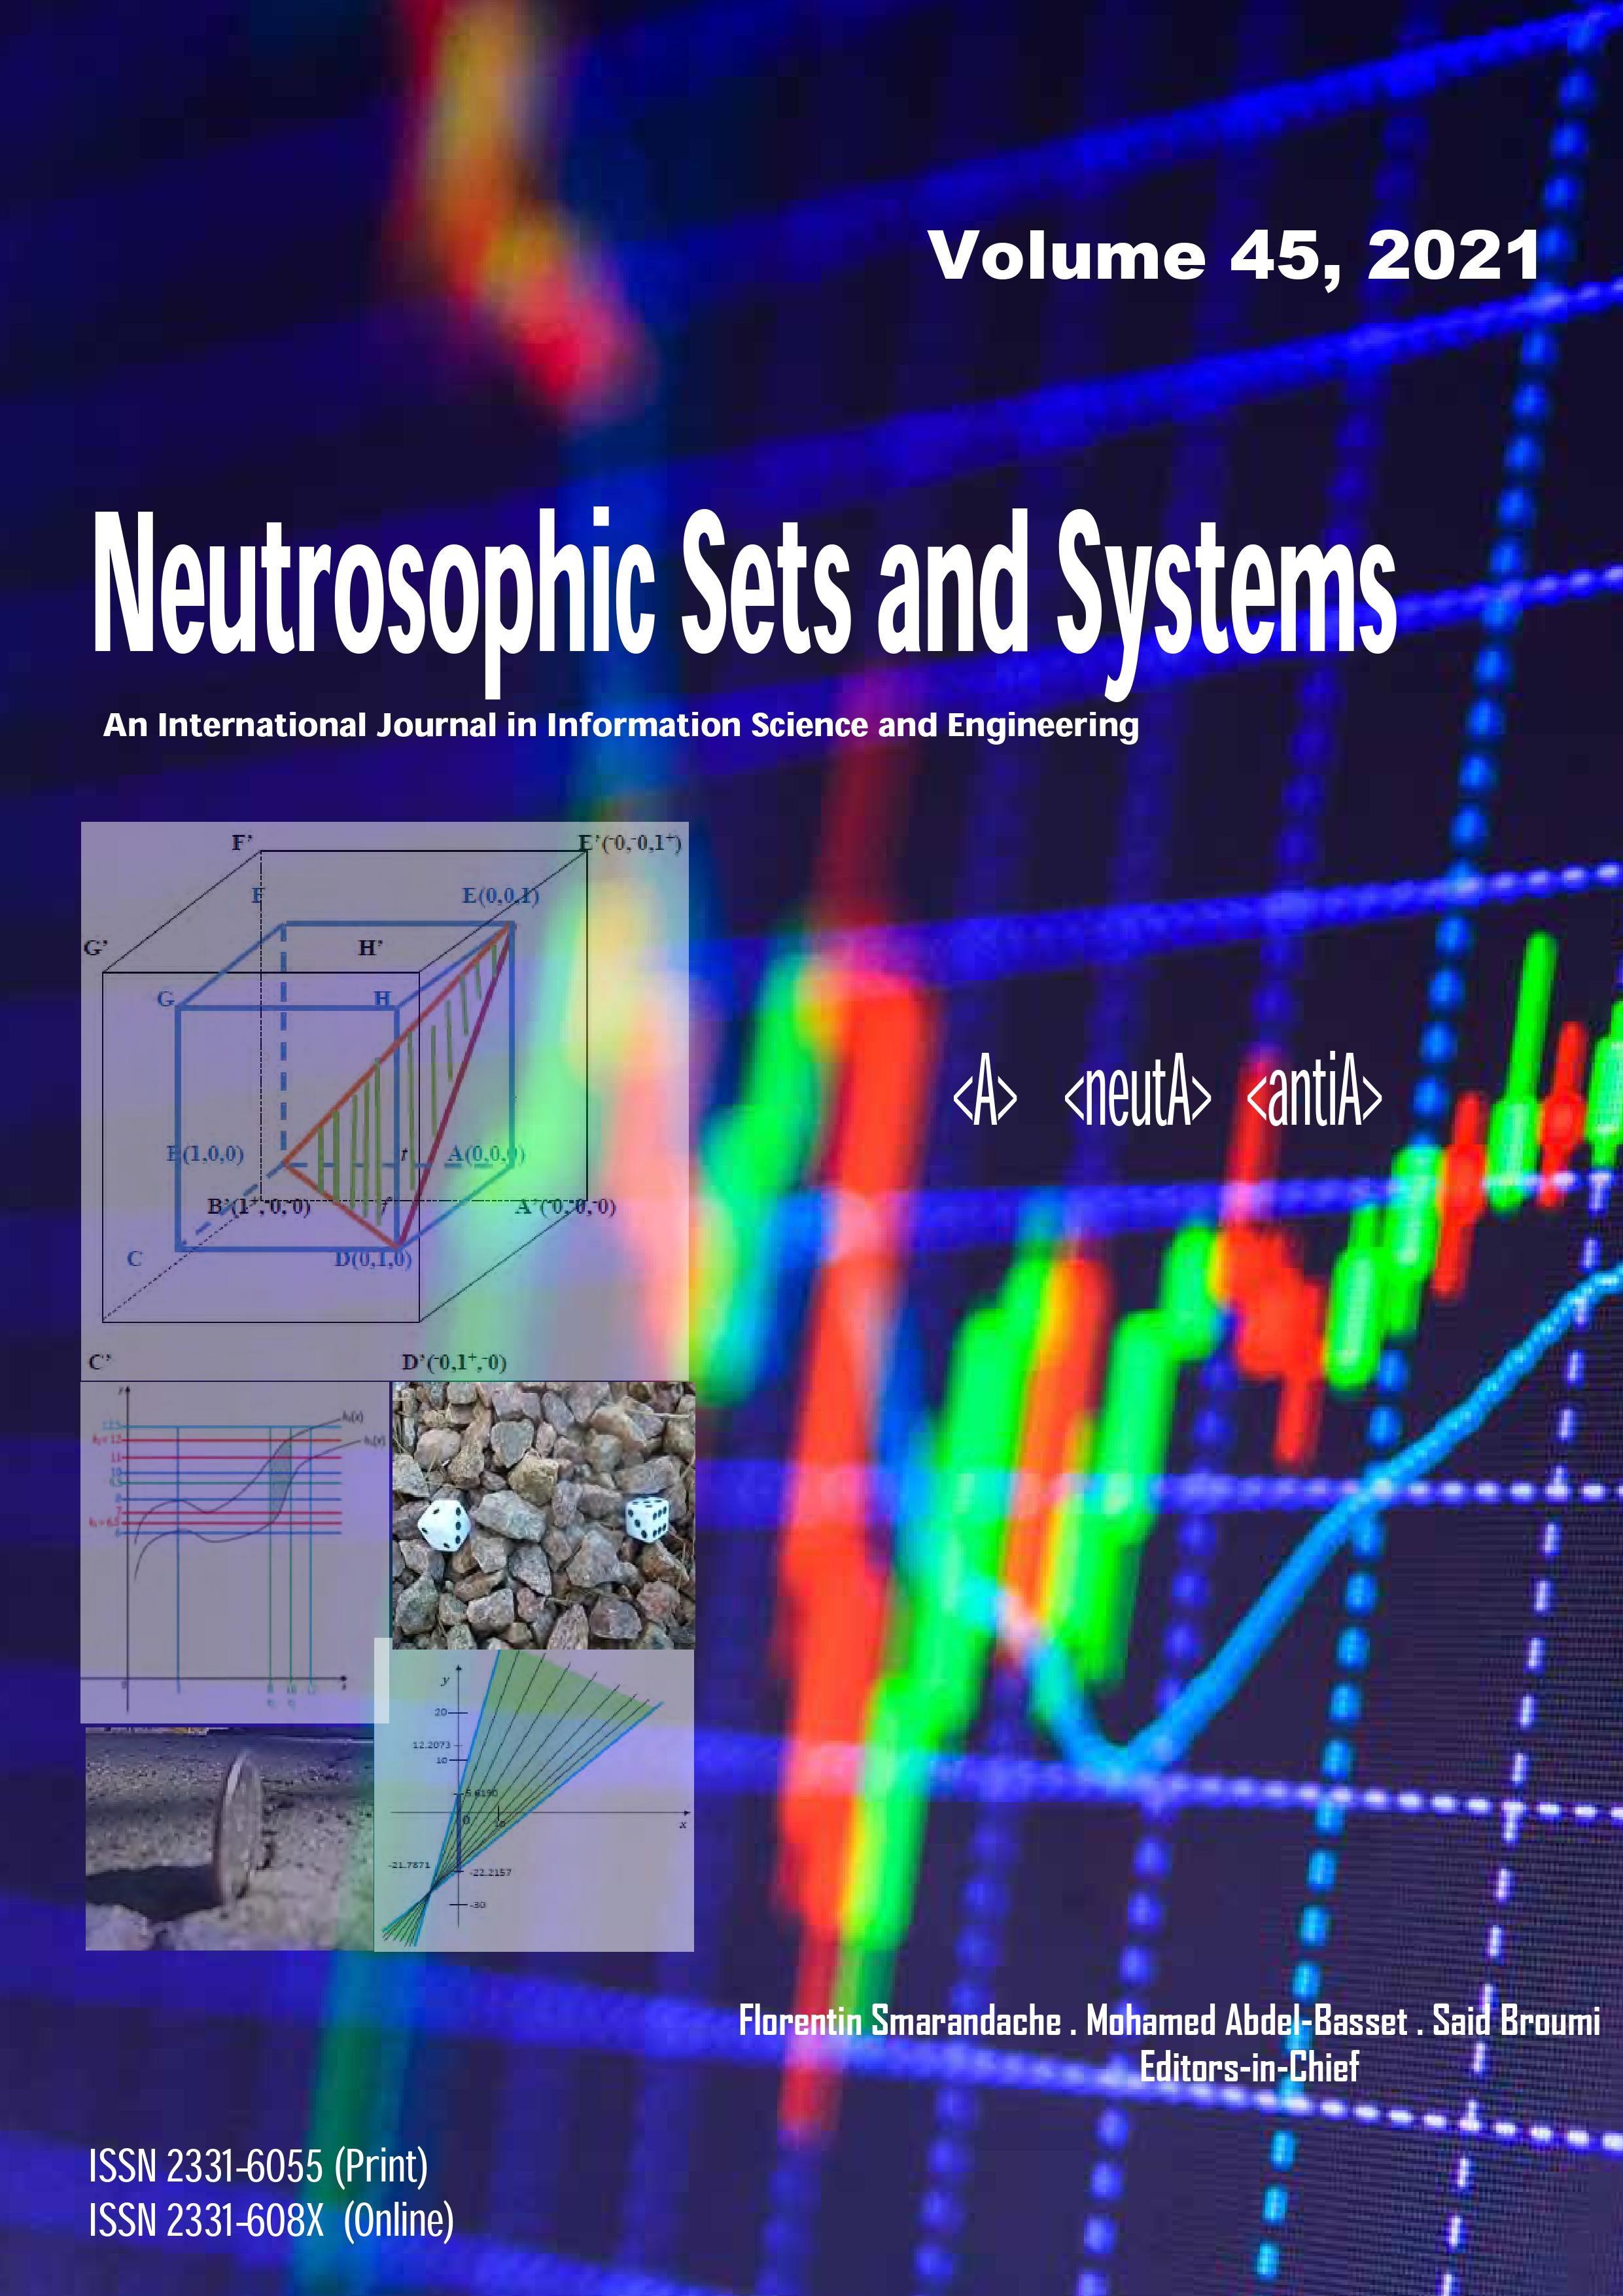 					View Vol. 45 (2021): Neutrosophic Sets and Systems Vol. 45 (2021)
				